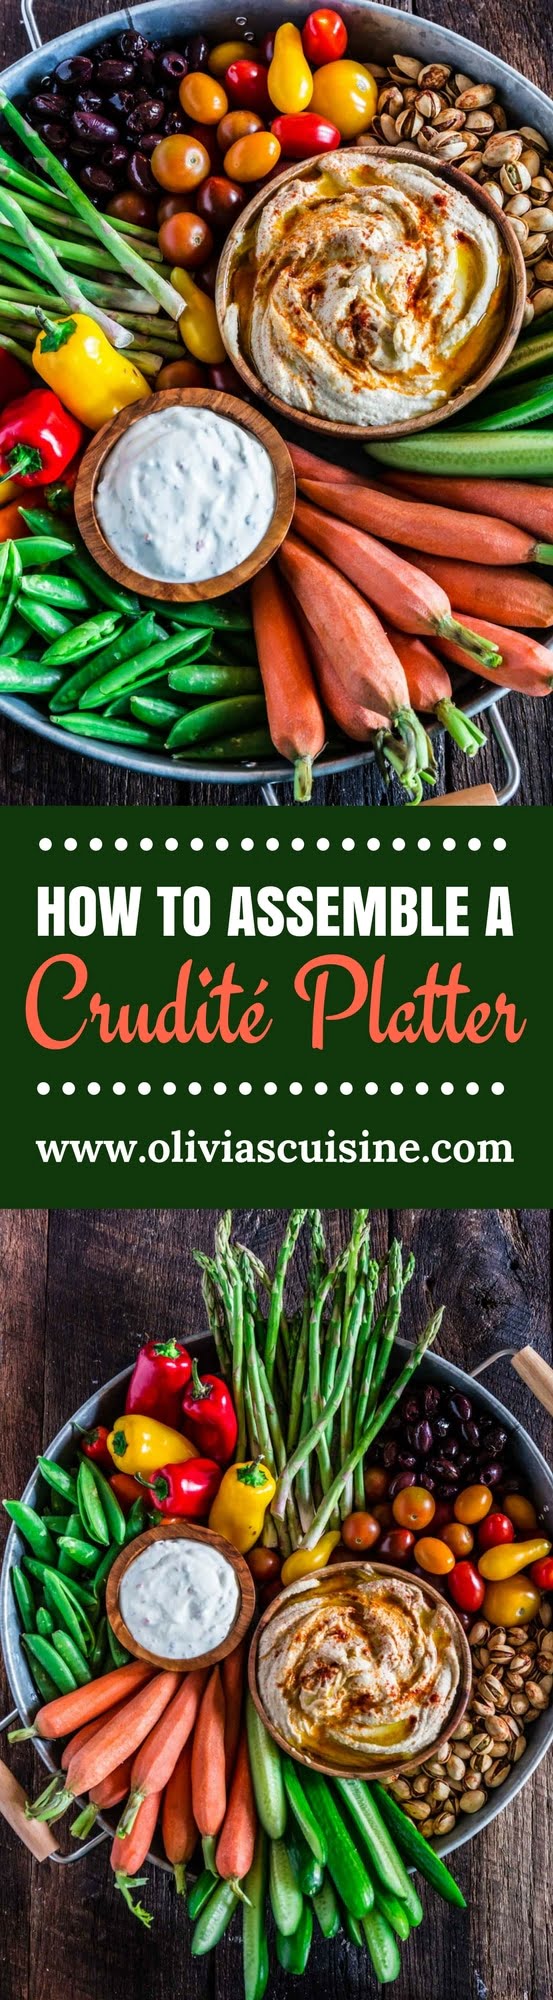 How to Assemble a Crudité Platter | www.oliviascuisine.com | Learn how to set up a Crudité Platter that your guests will actually enjoy, filled with fresh and seasonal veggies and a few delicious dips, olives and nuts. Follow this quick guide and I guarantee you will find even the pickiest of eaters hanging around this awesome vegetable tray! (Recipe and photos by @oliviascuisine)